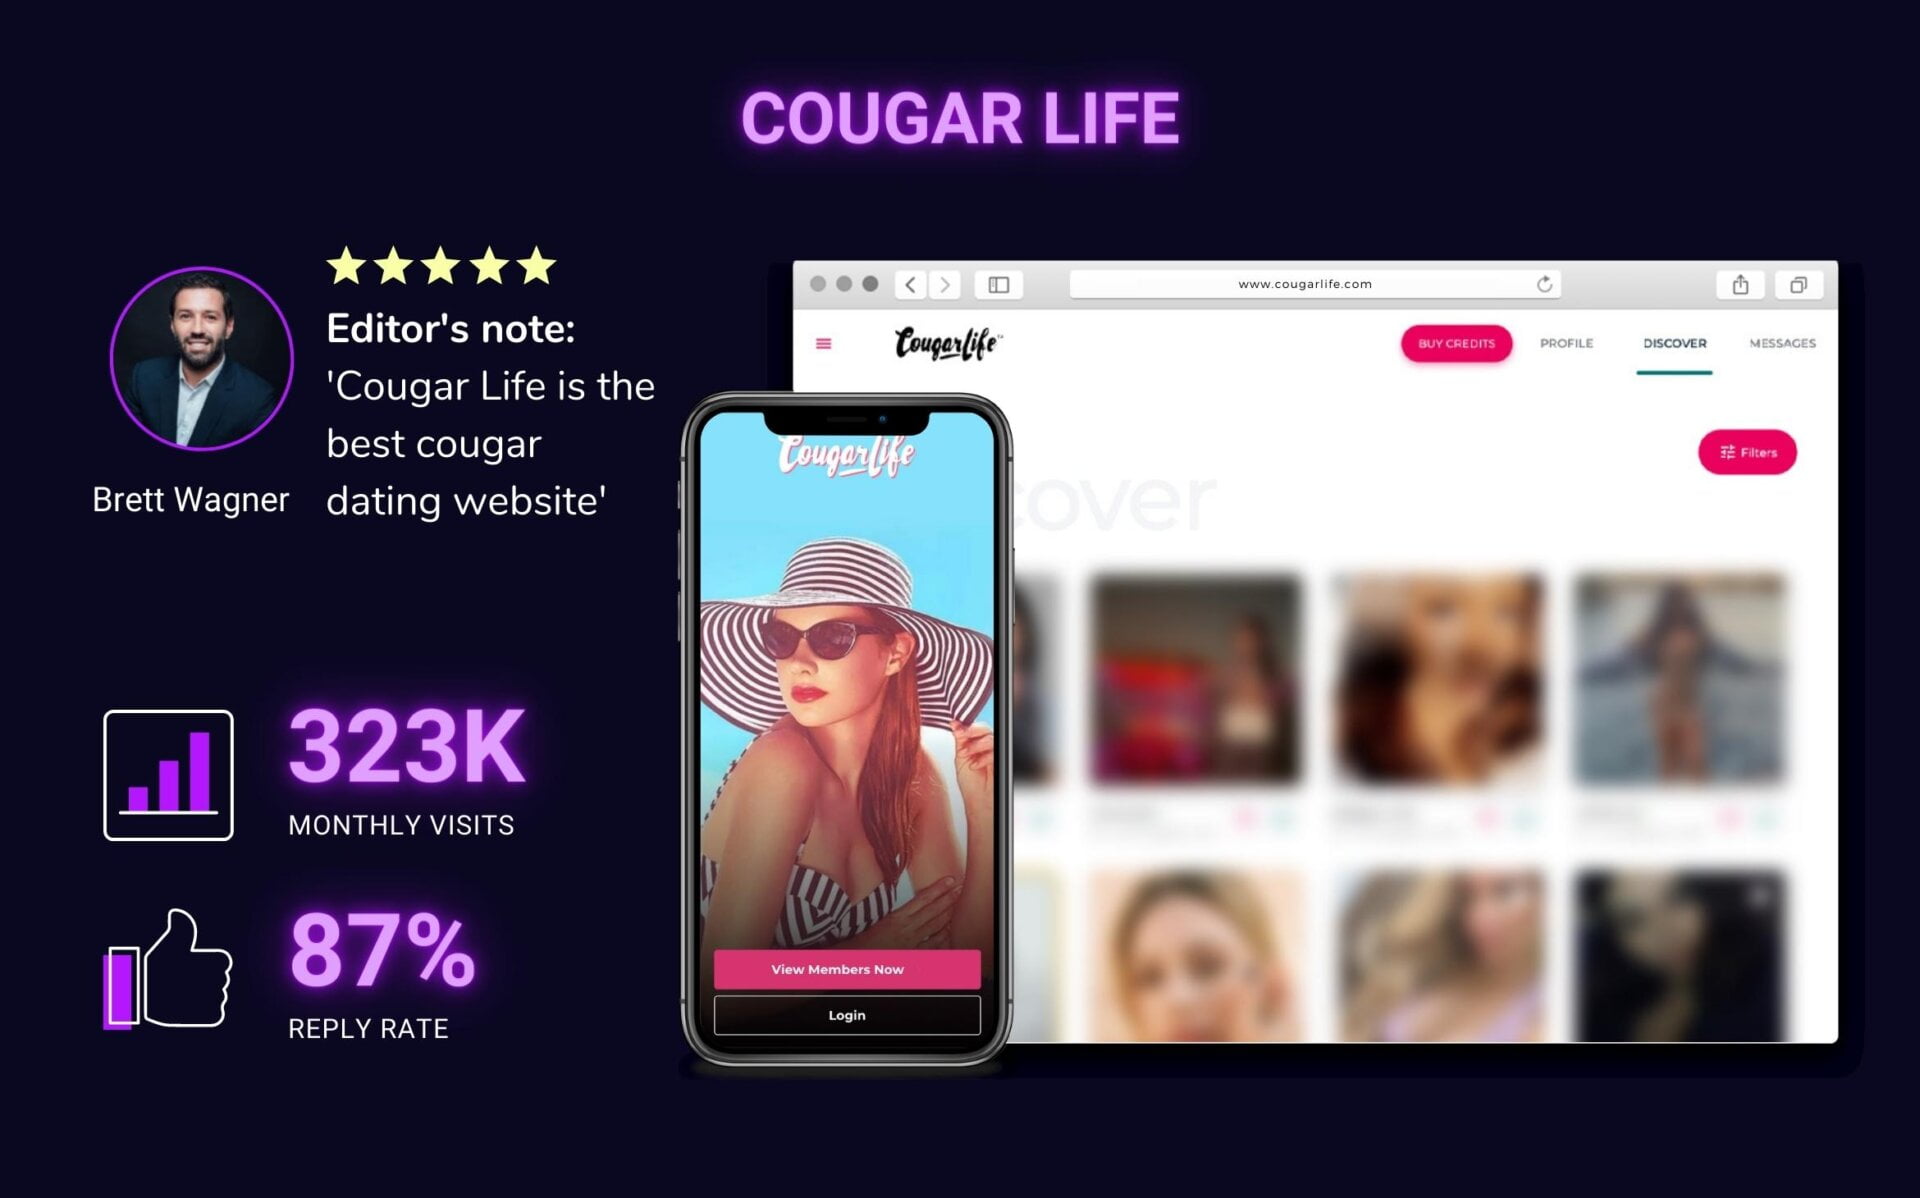 Onlycougars